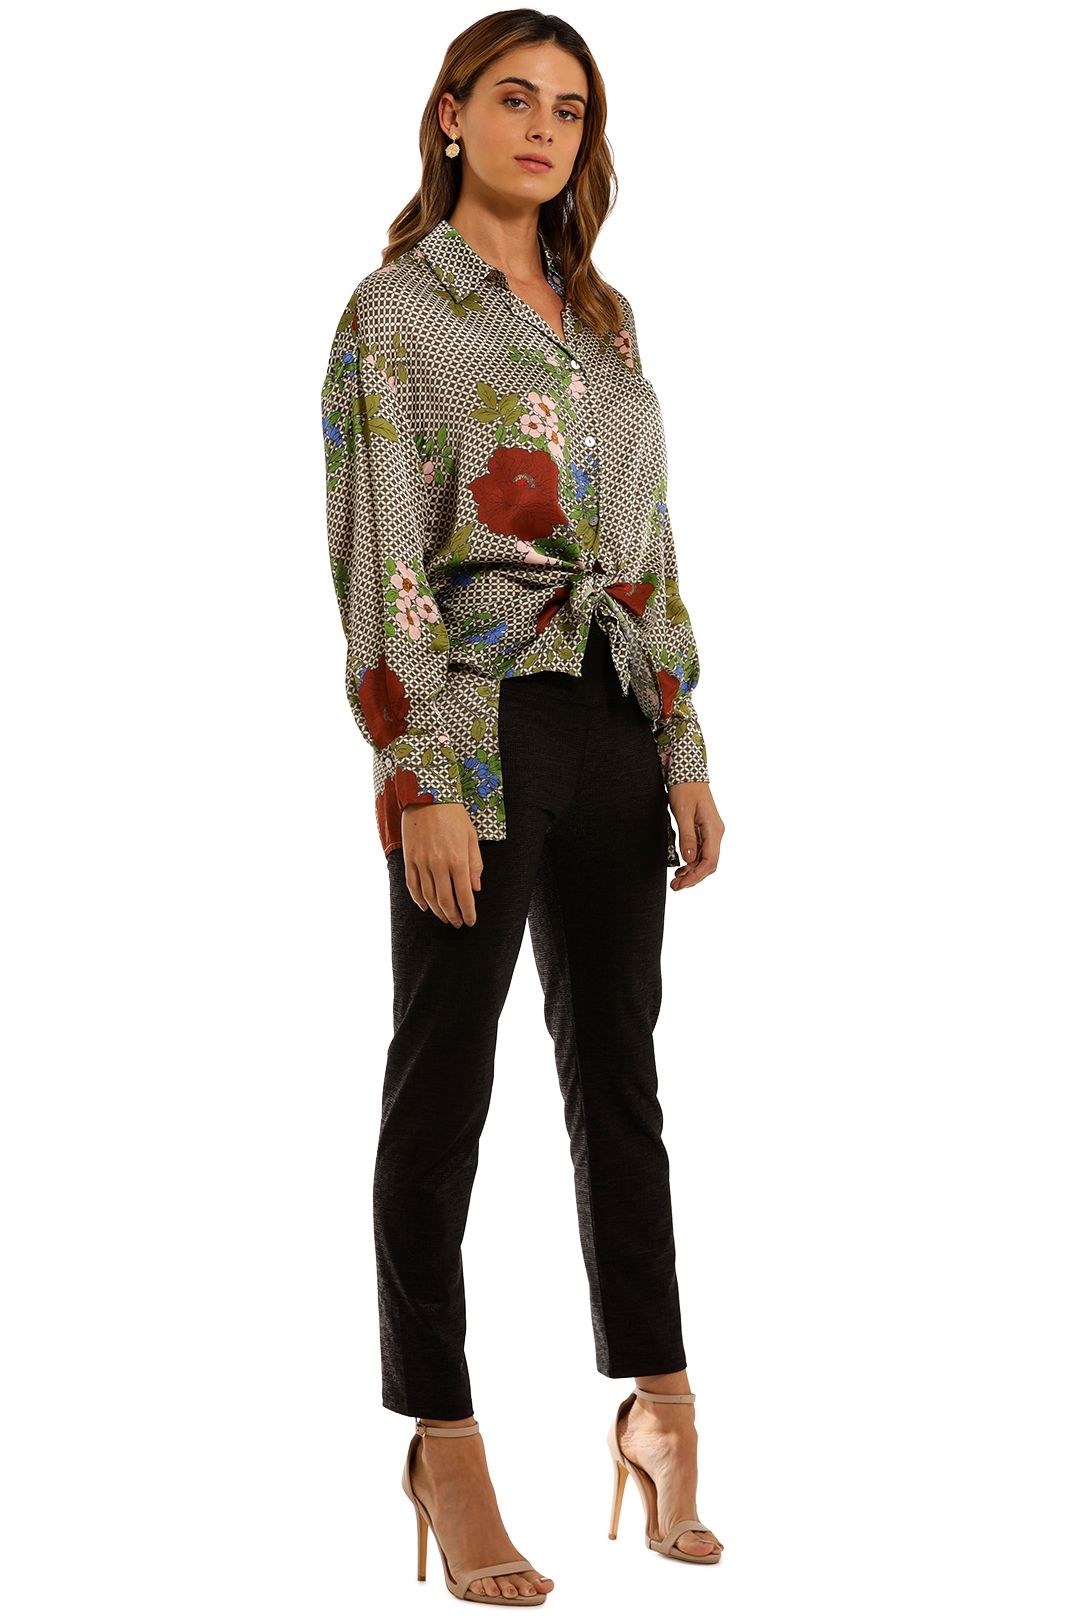 Curate by Trelise Cooper Ladies Blouse long sleeve